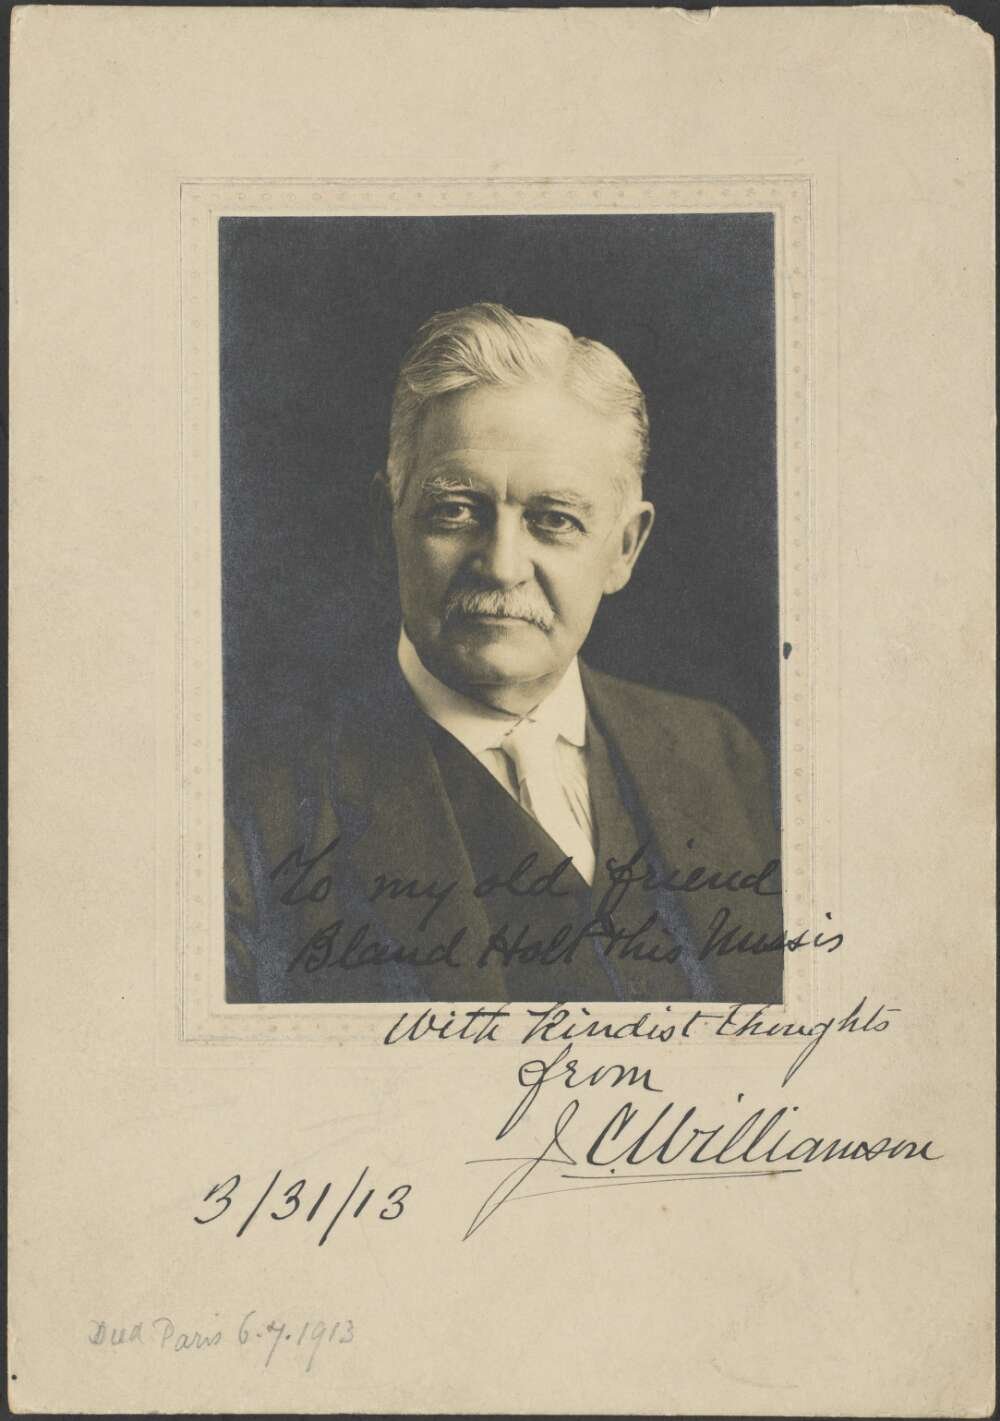 Black and white portrait photograph of a man looking directly at the camera. The photograph is signed and dated March 1913